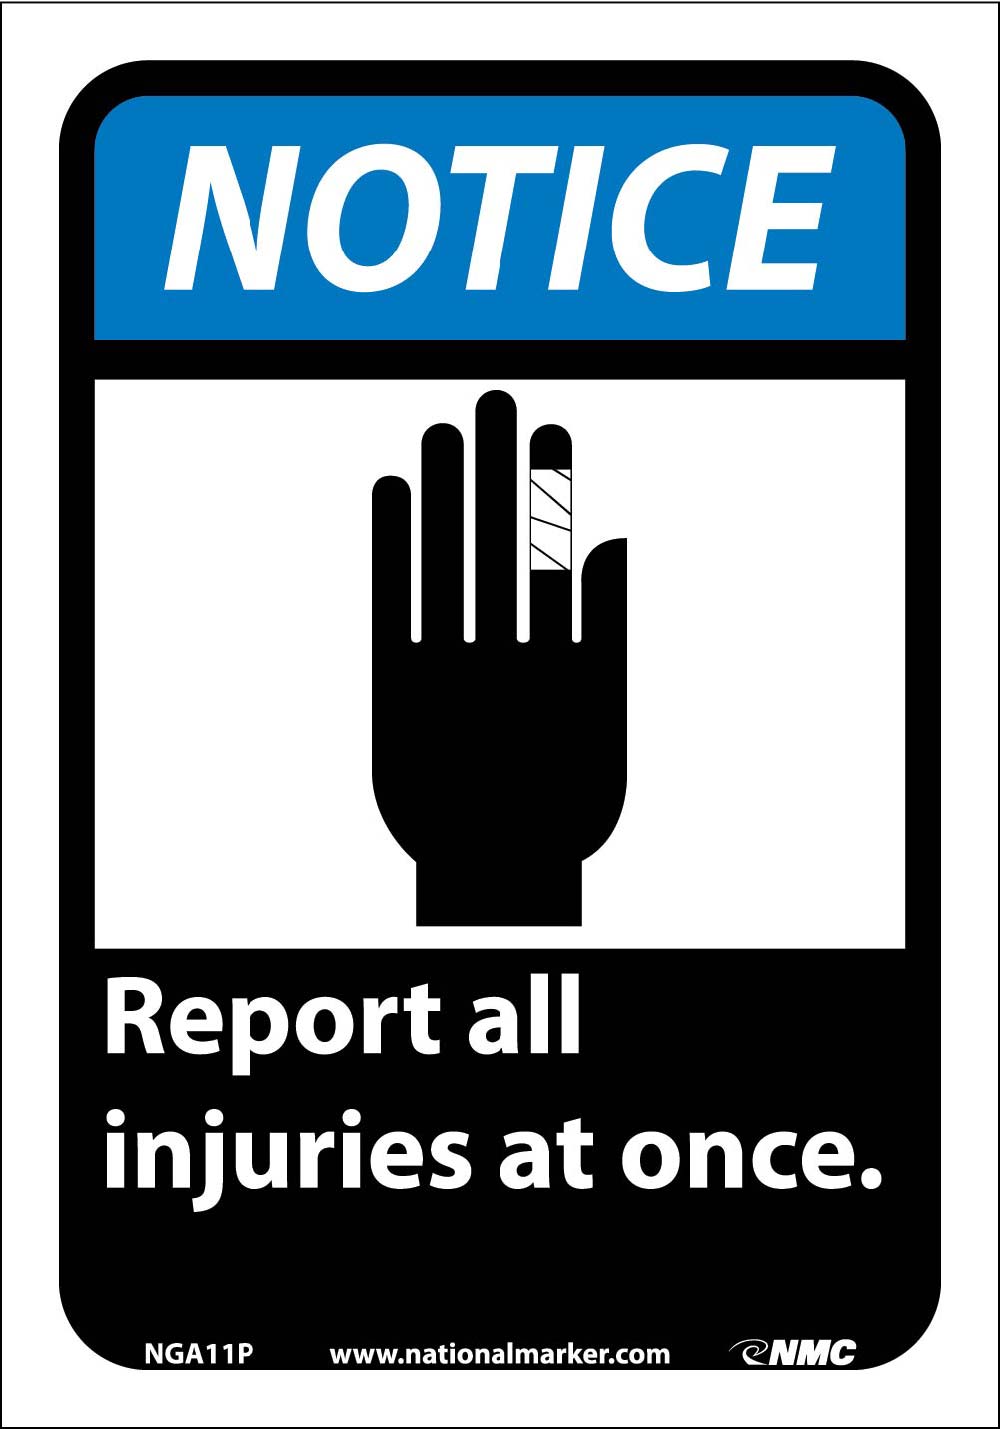 Notice Report All Injuries At Once Sign-eSafety Supplies, Inc